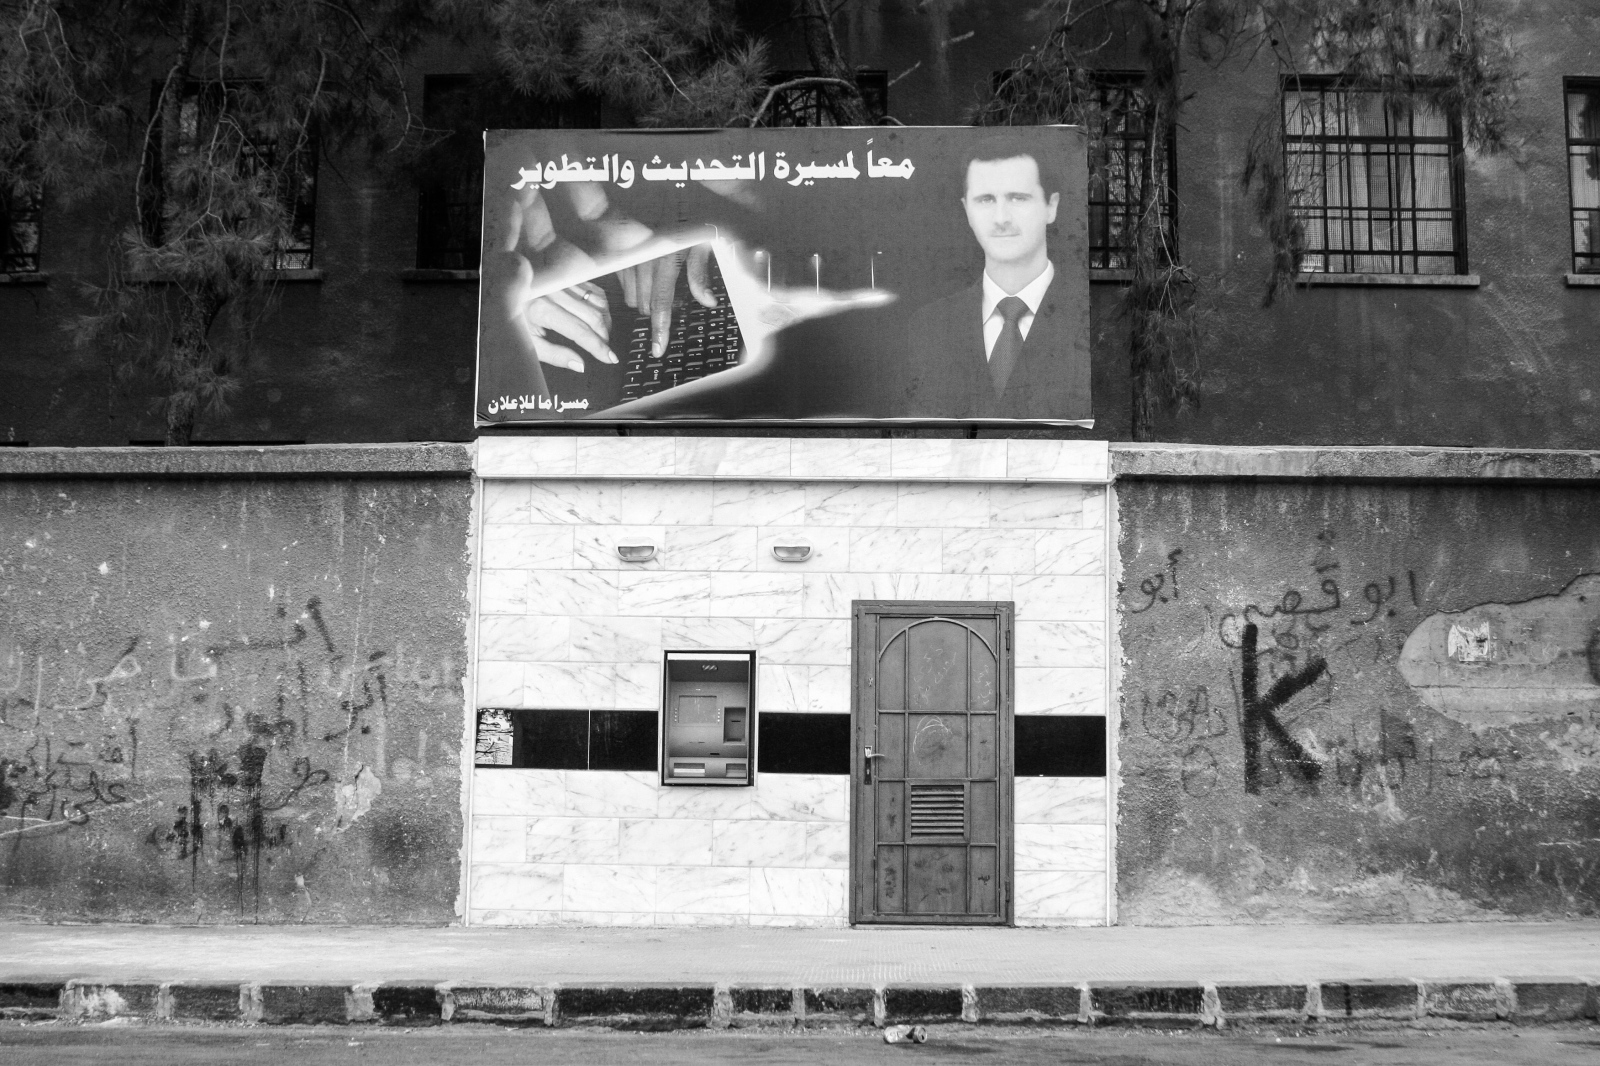  ATM machine popping out of a dirty school, sign reads &quot;together for progression and development&quot;. Damascus, 2007 